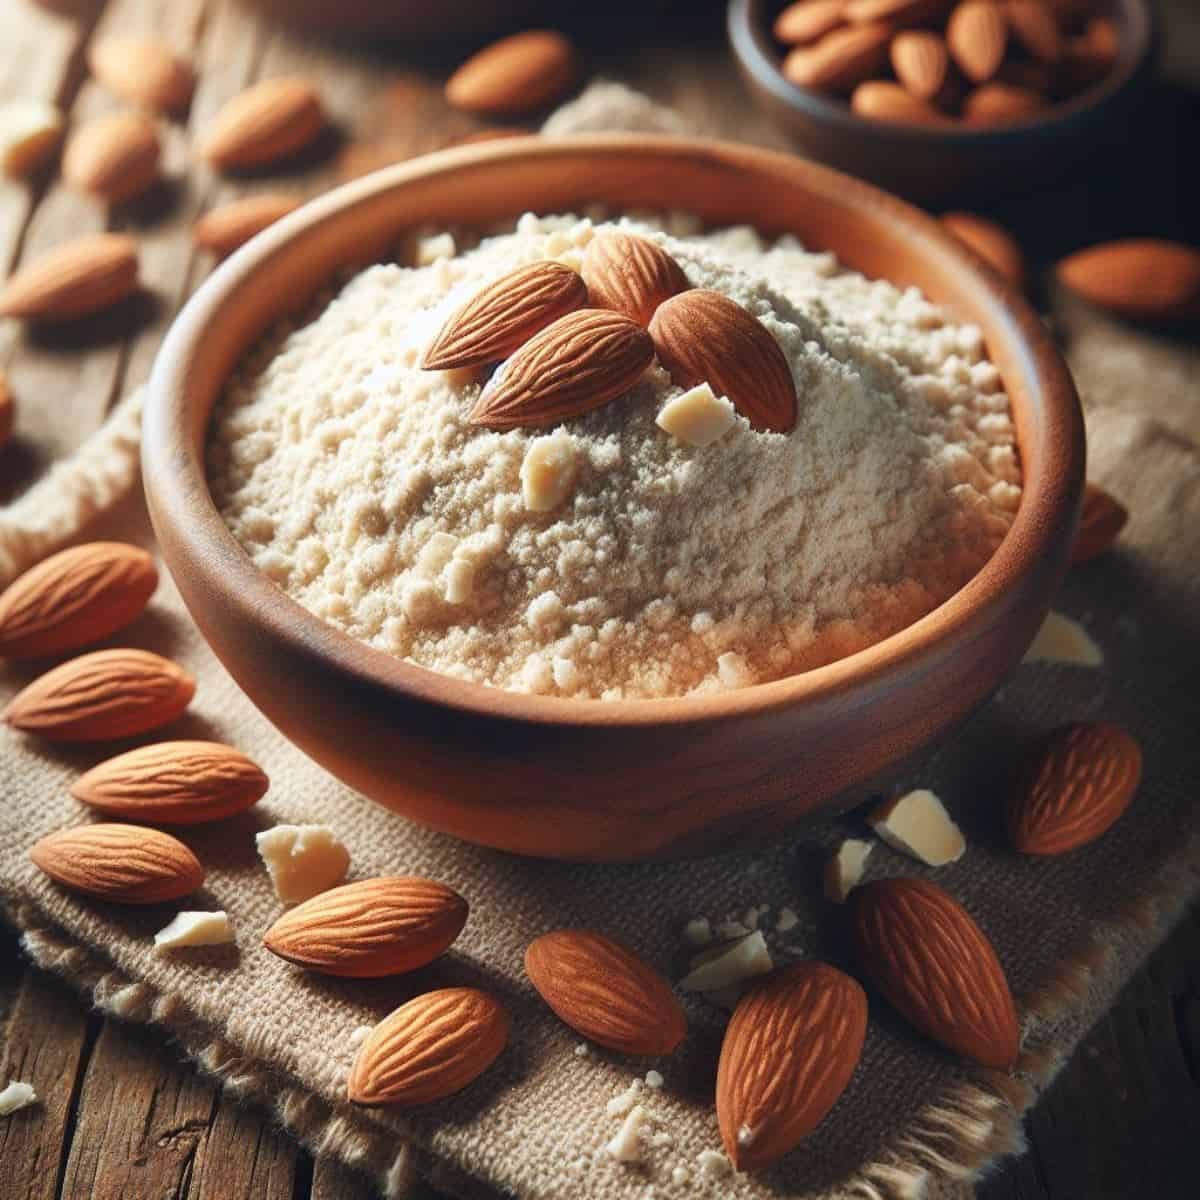 almond meal in a container on table